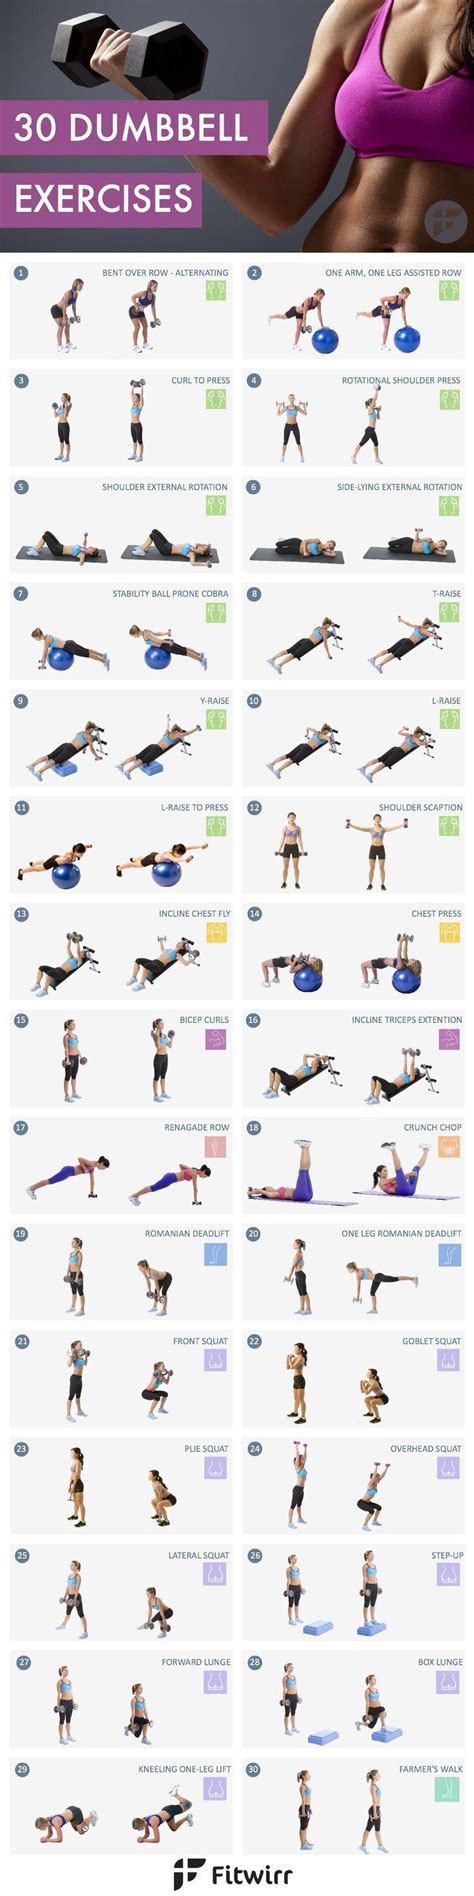 33 Womens Arm Dumbbell Workout Pics Full Body Dumbbell Workout